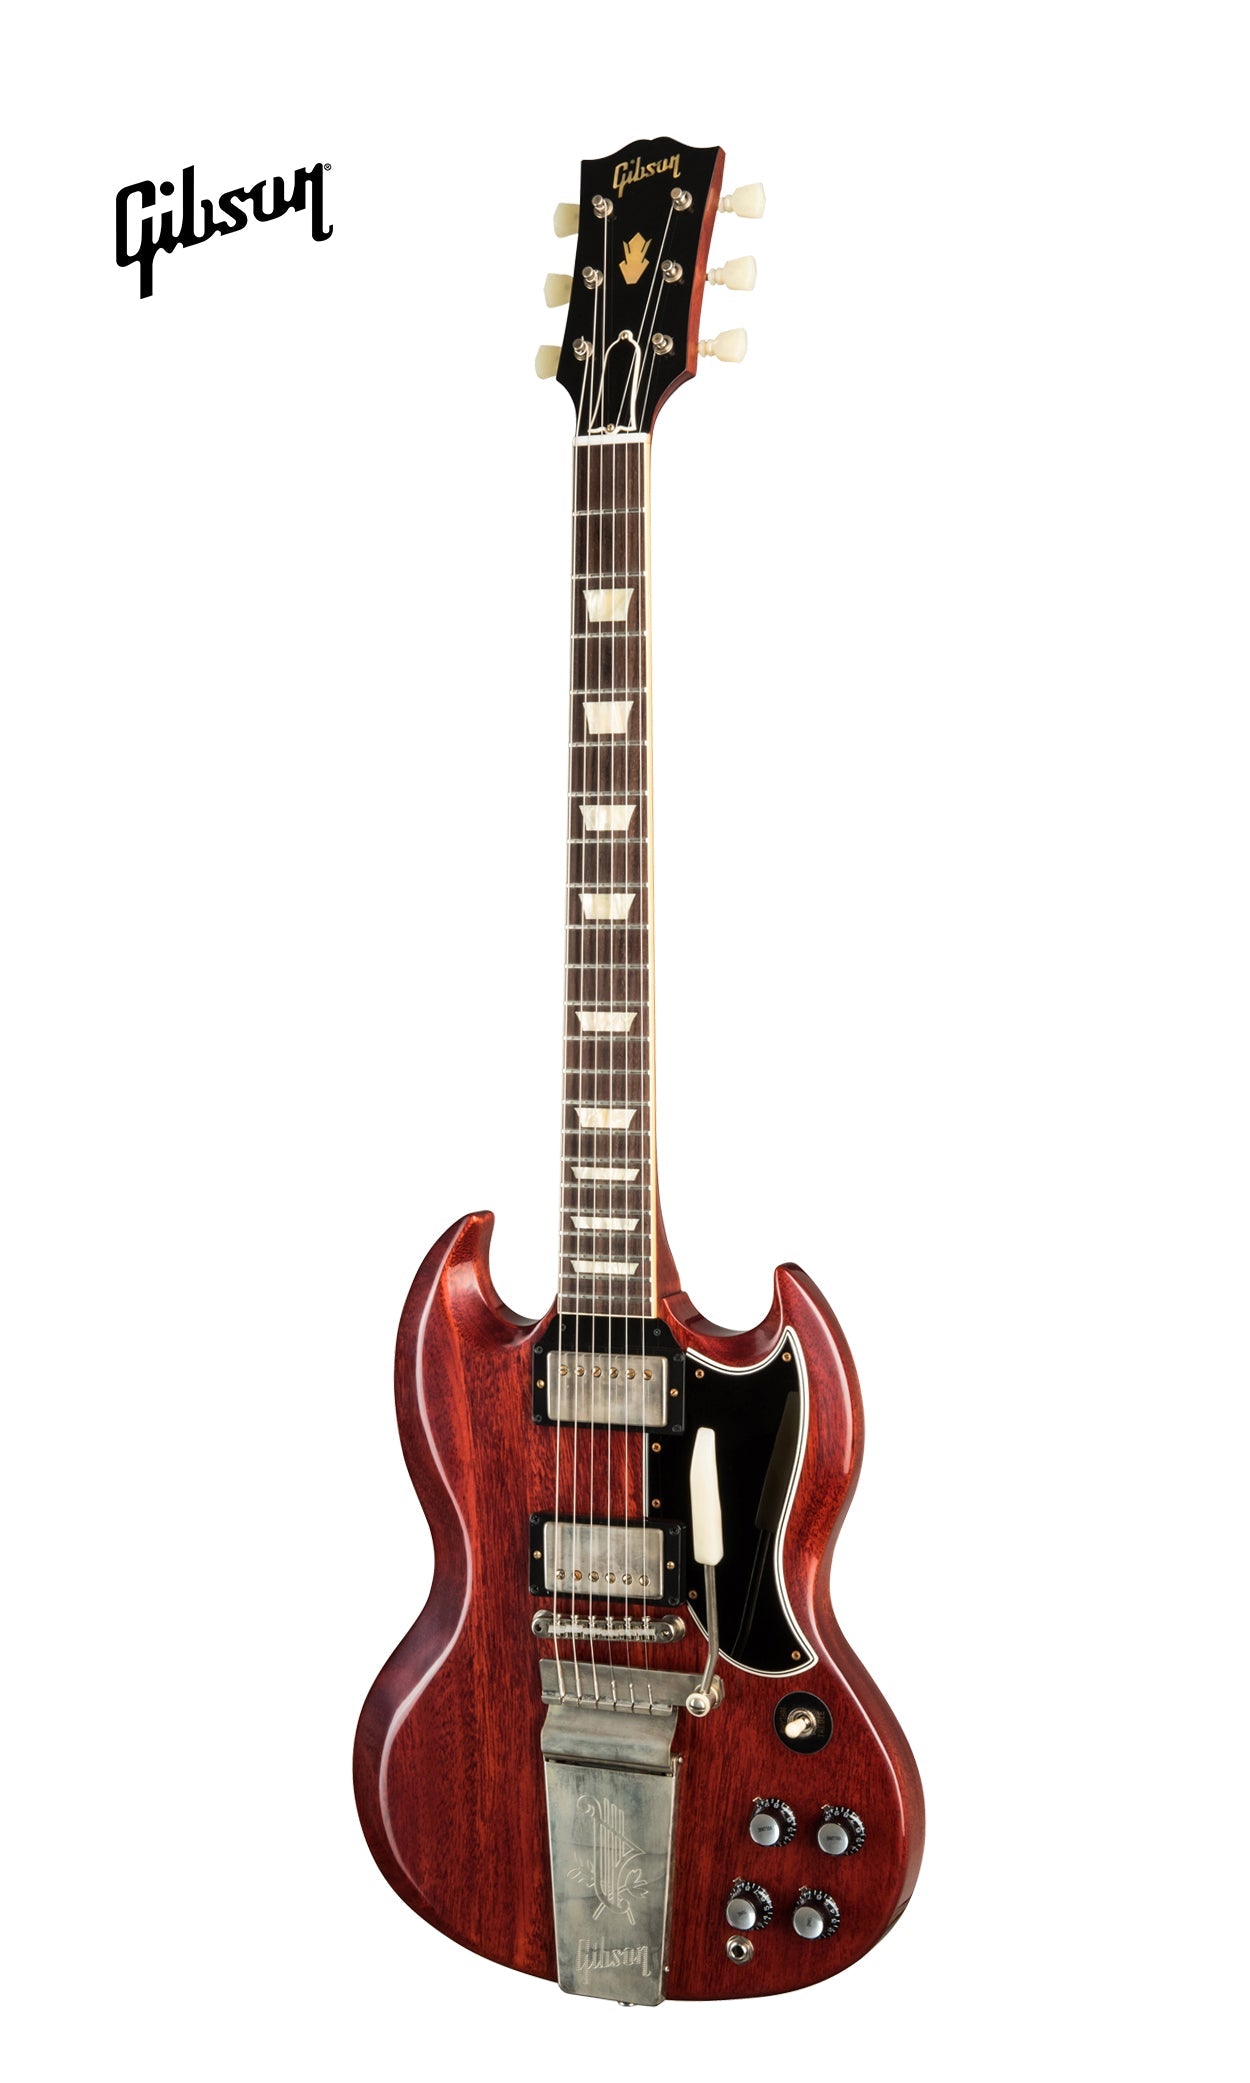 GIBSON 1964 SG STANDARD REISSUE WITH MAESTRO VIBROLA VOS ELECTRIC GUITAR -  CHERRY RED